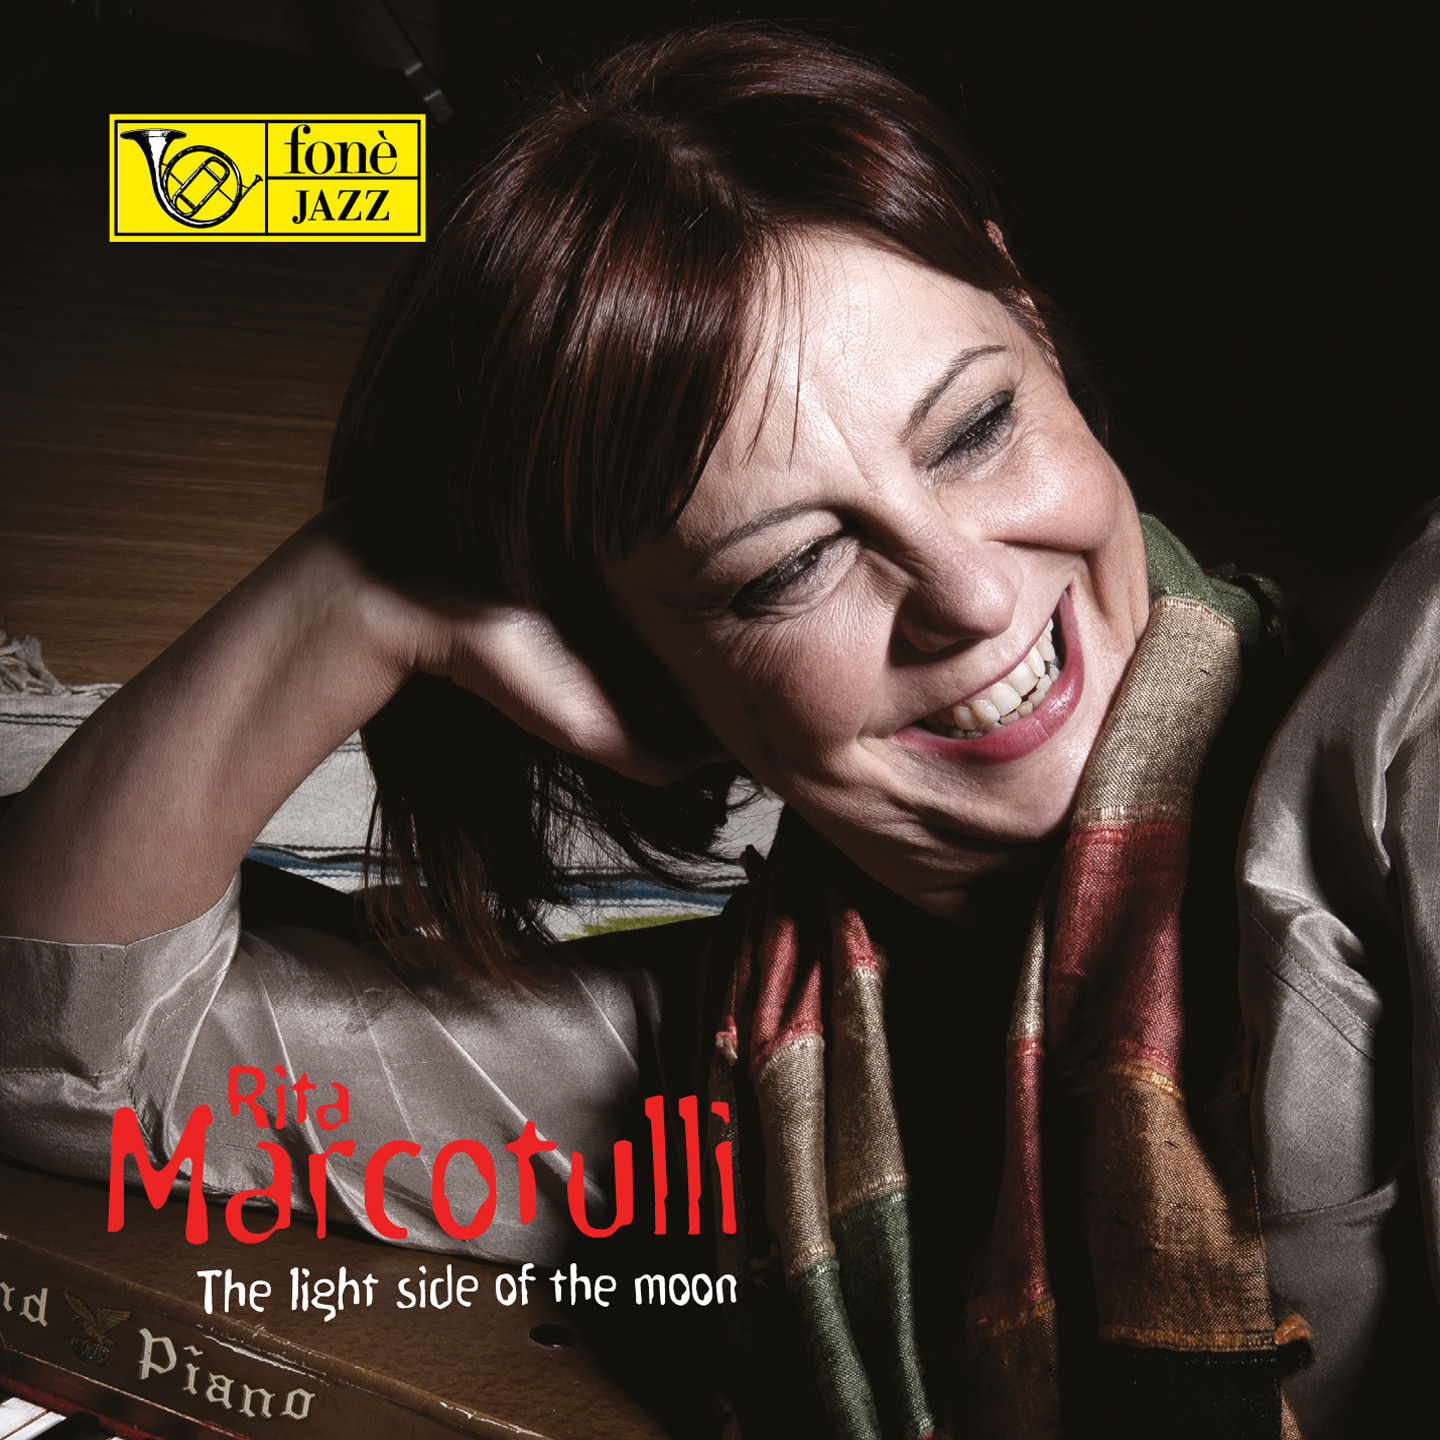 Rita Marcotulli - The Light Side Of The Moon (2006/2017) [NativeDSDmusic DSF DSD64/2.82MHz + FLAC 24bit/88,2kHz]